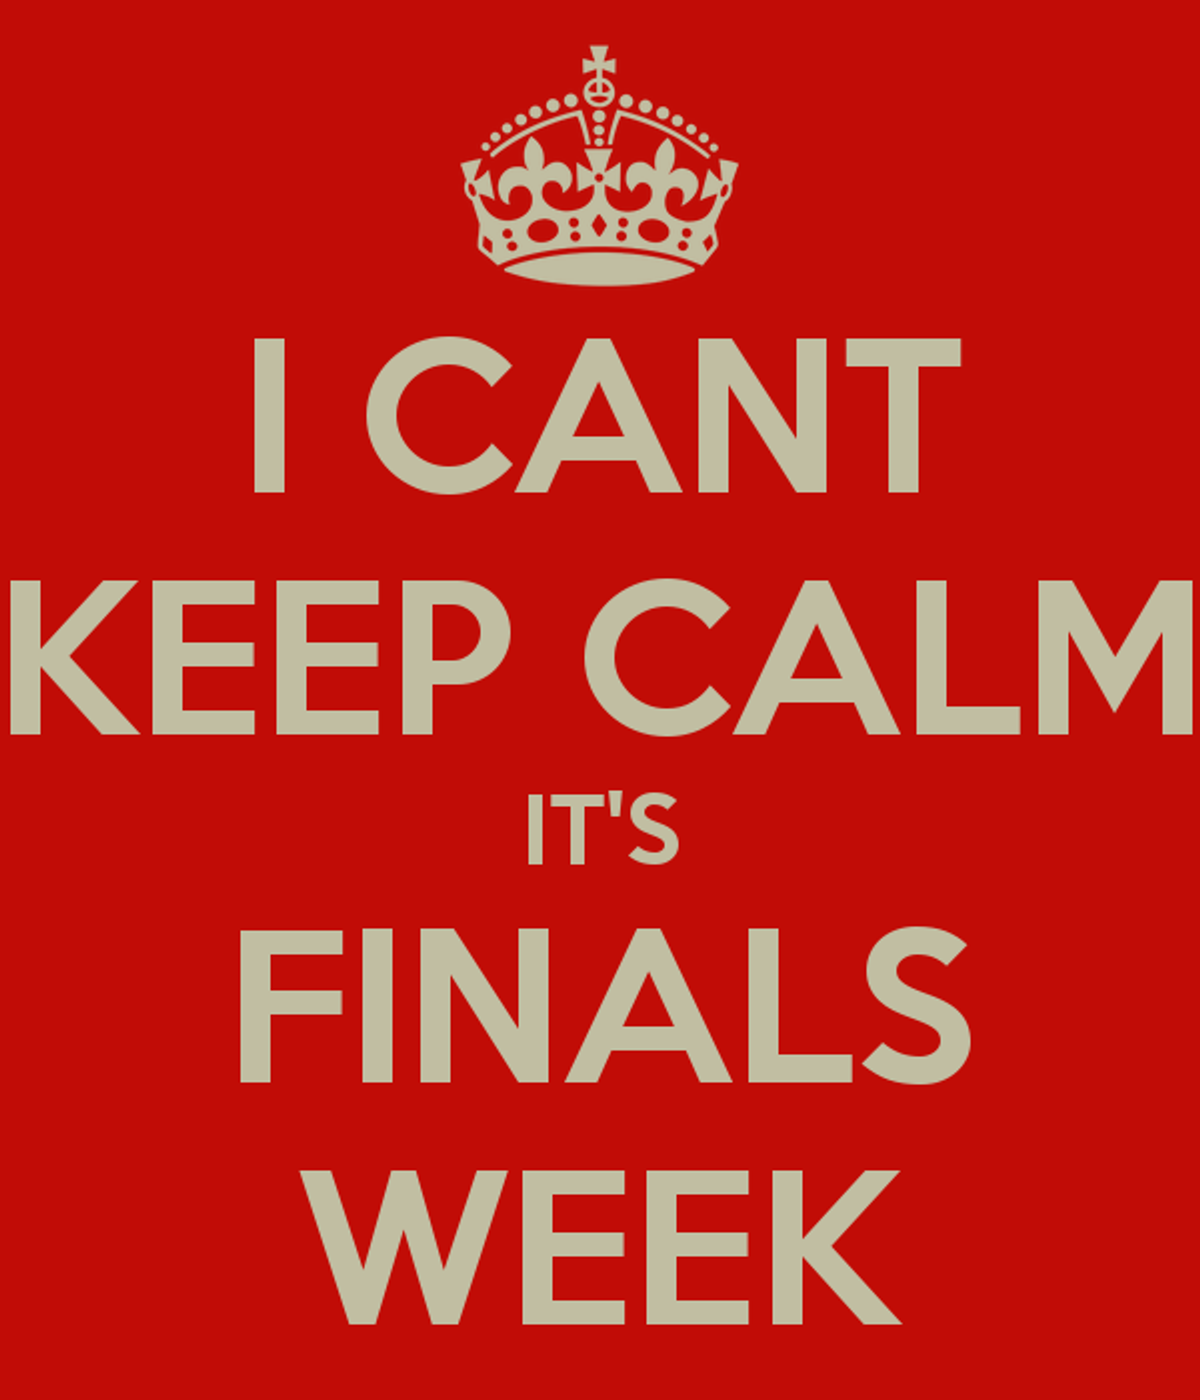 7 Things Every College Student Does During Finals Week